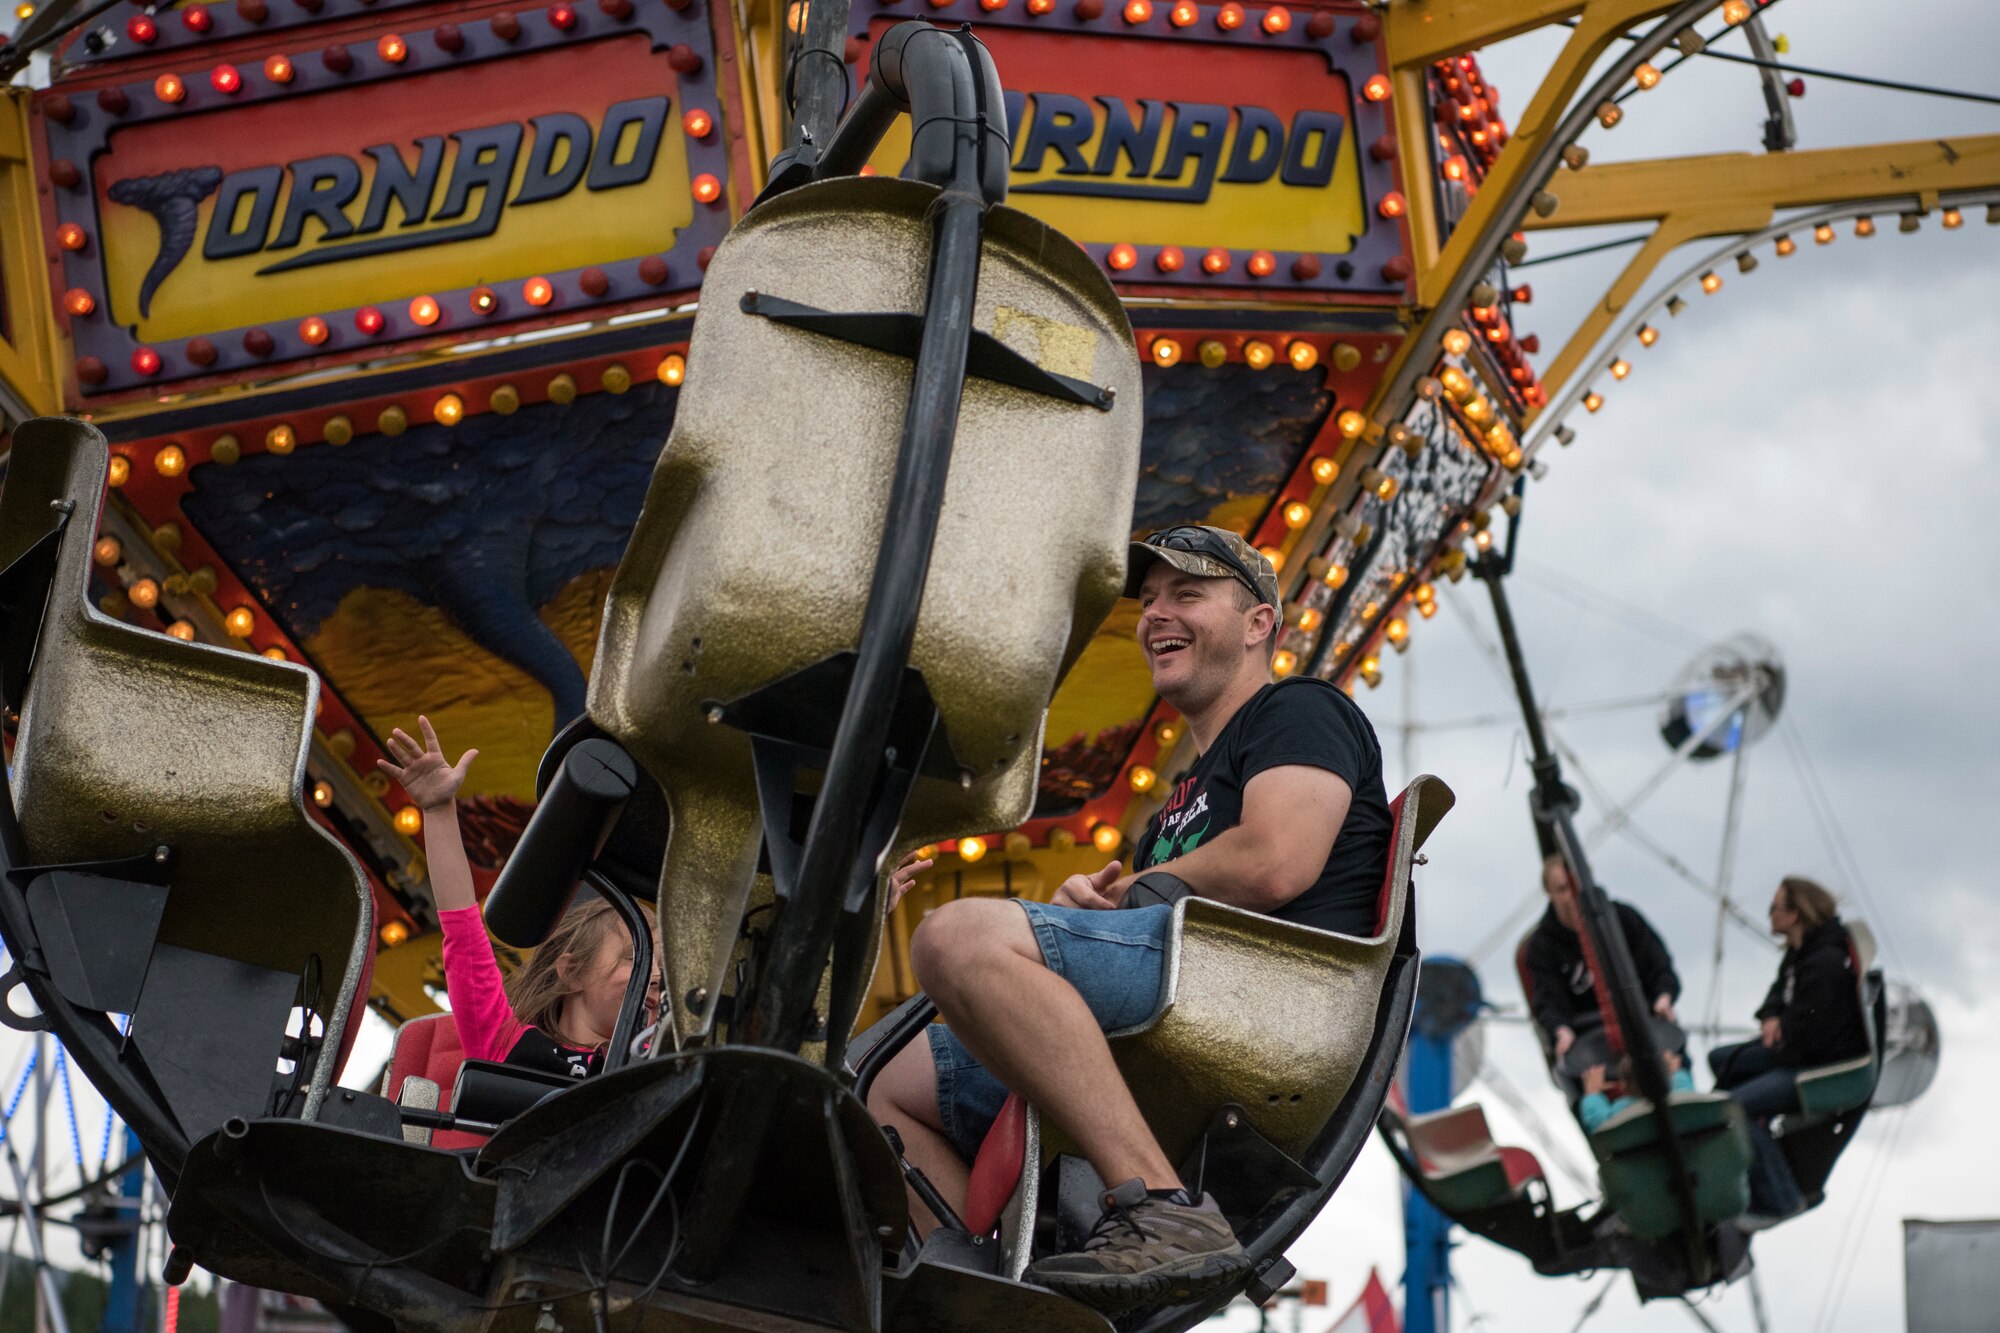 Participants ride the “Tornado” during the 3rd annual Summer Fest hosted by the 673d Force Support Squadron at Joint Base Elmendorf-Richardson, Alaska, July 8, 2018. The event was open to anyone with base access and offered free activities such as carnival rides, a petting zoo, face painting, a bungee trampoline, and carnival games.